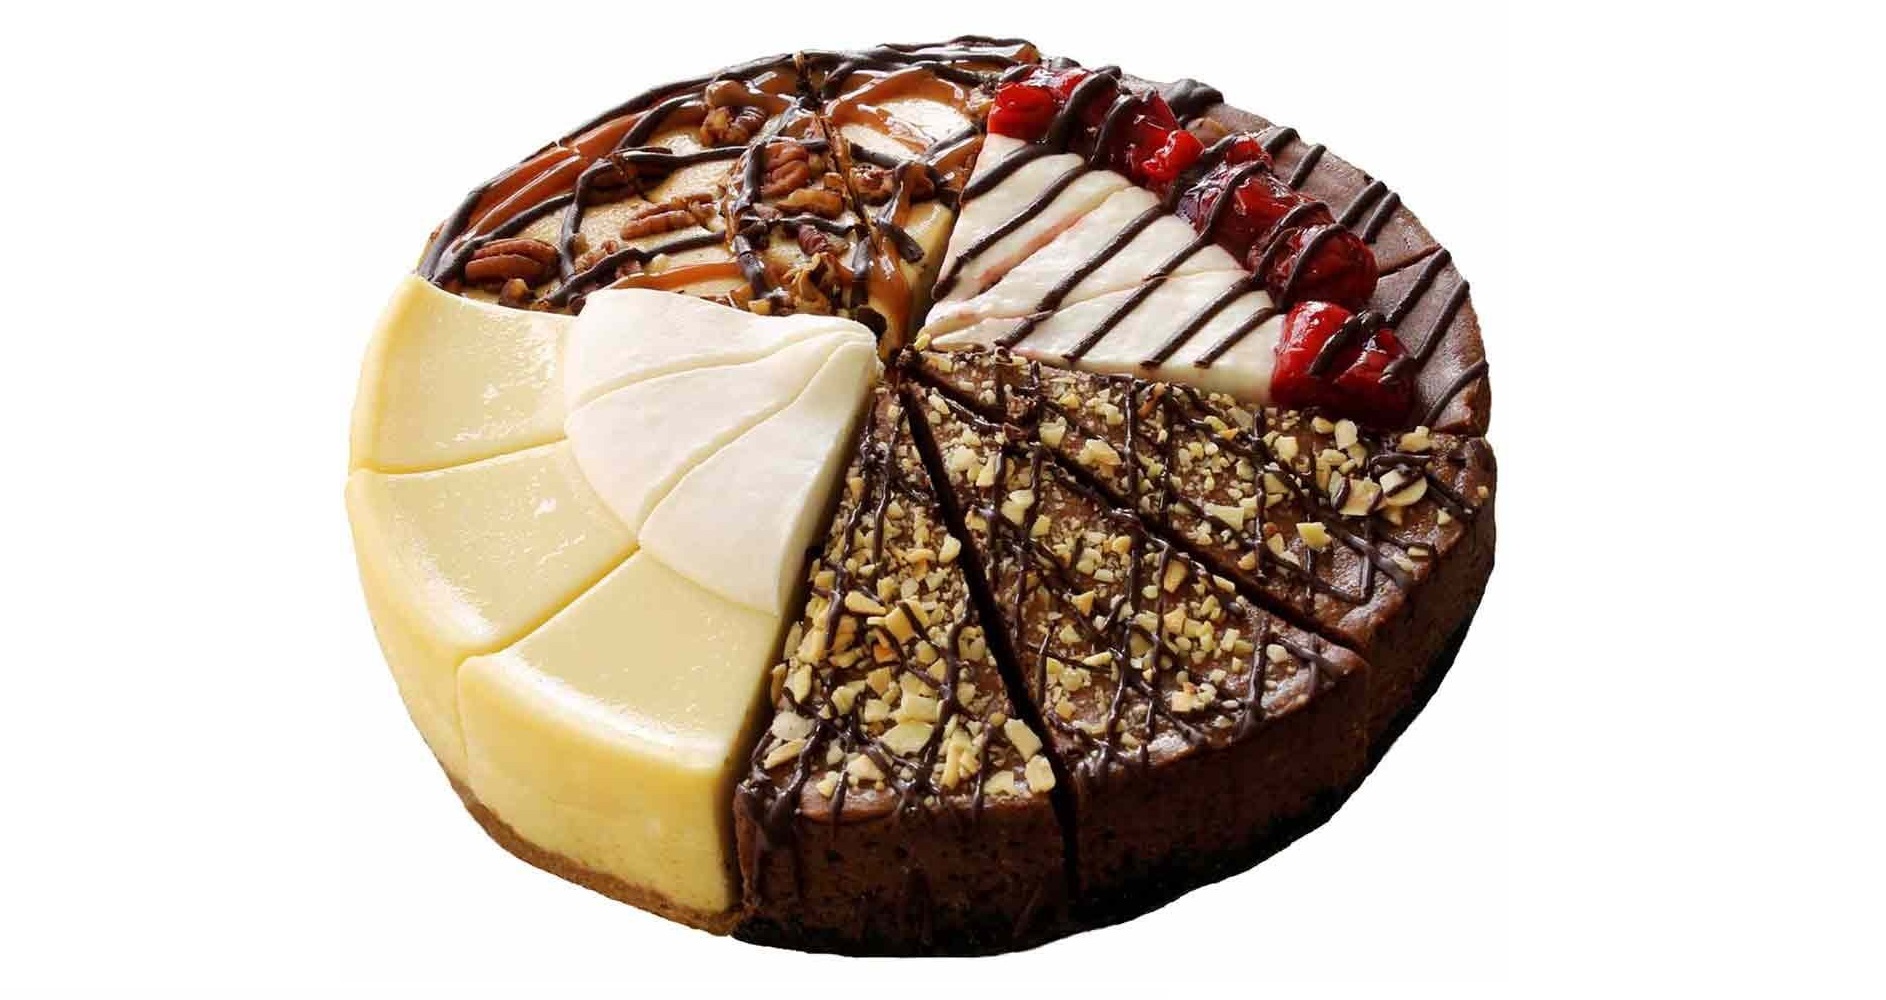 Suzy's Four-Flavor Cheesecake Gift Sampler Wisconsinmade